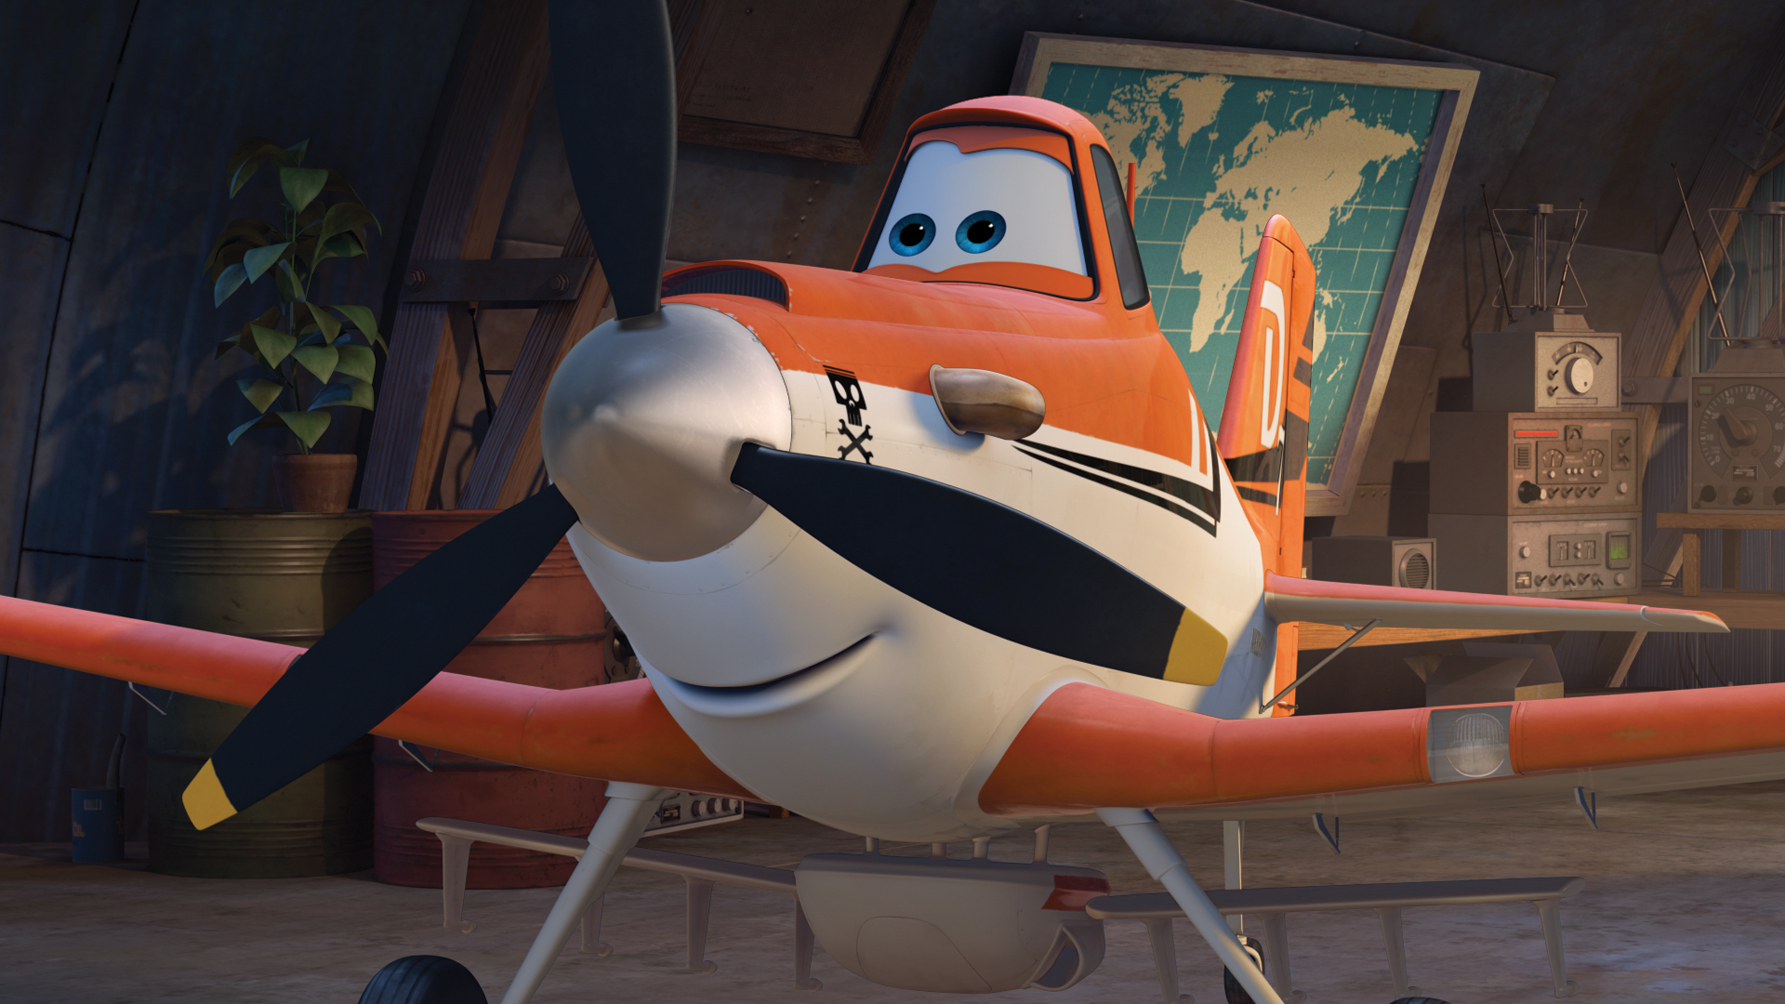 Dane Cook voices the character DUSTY in "PLANES." 